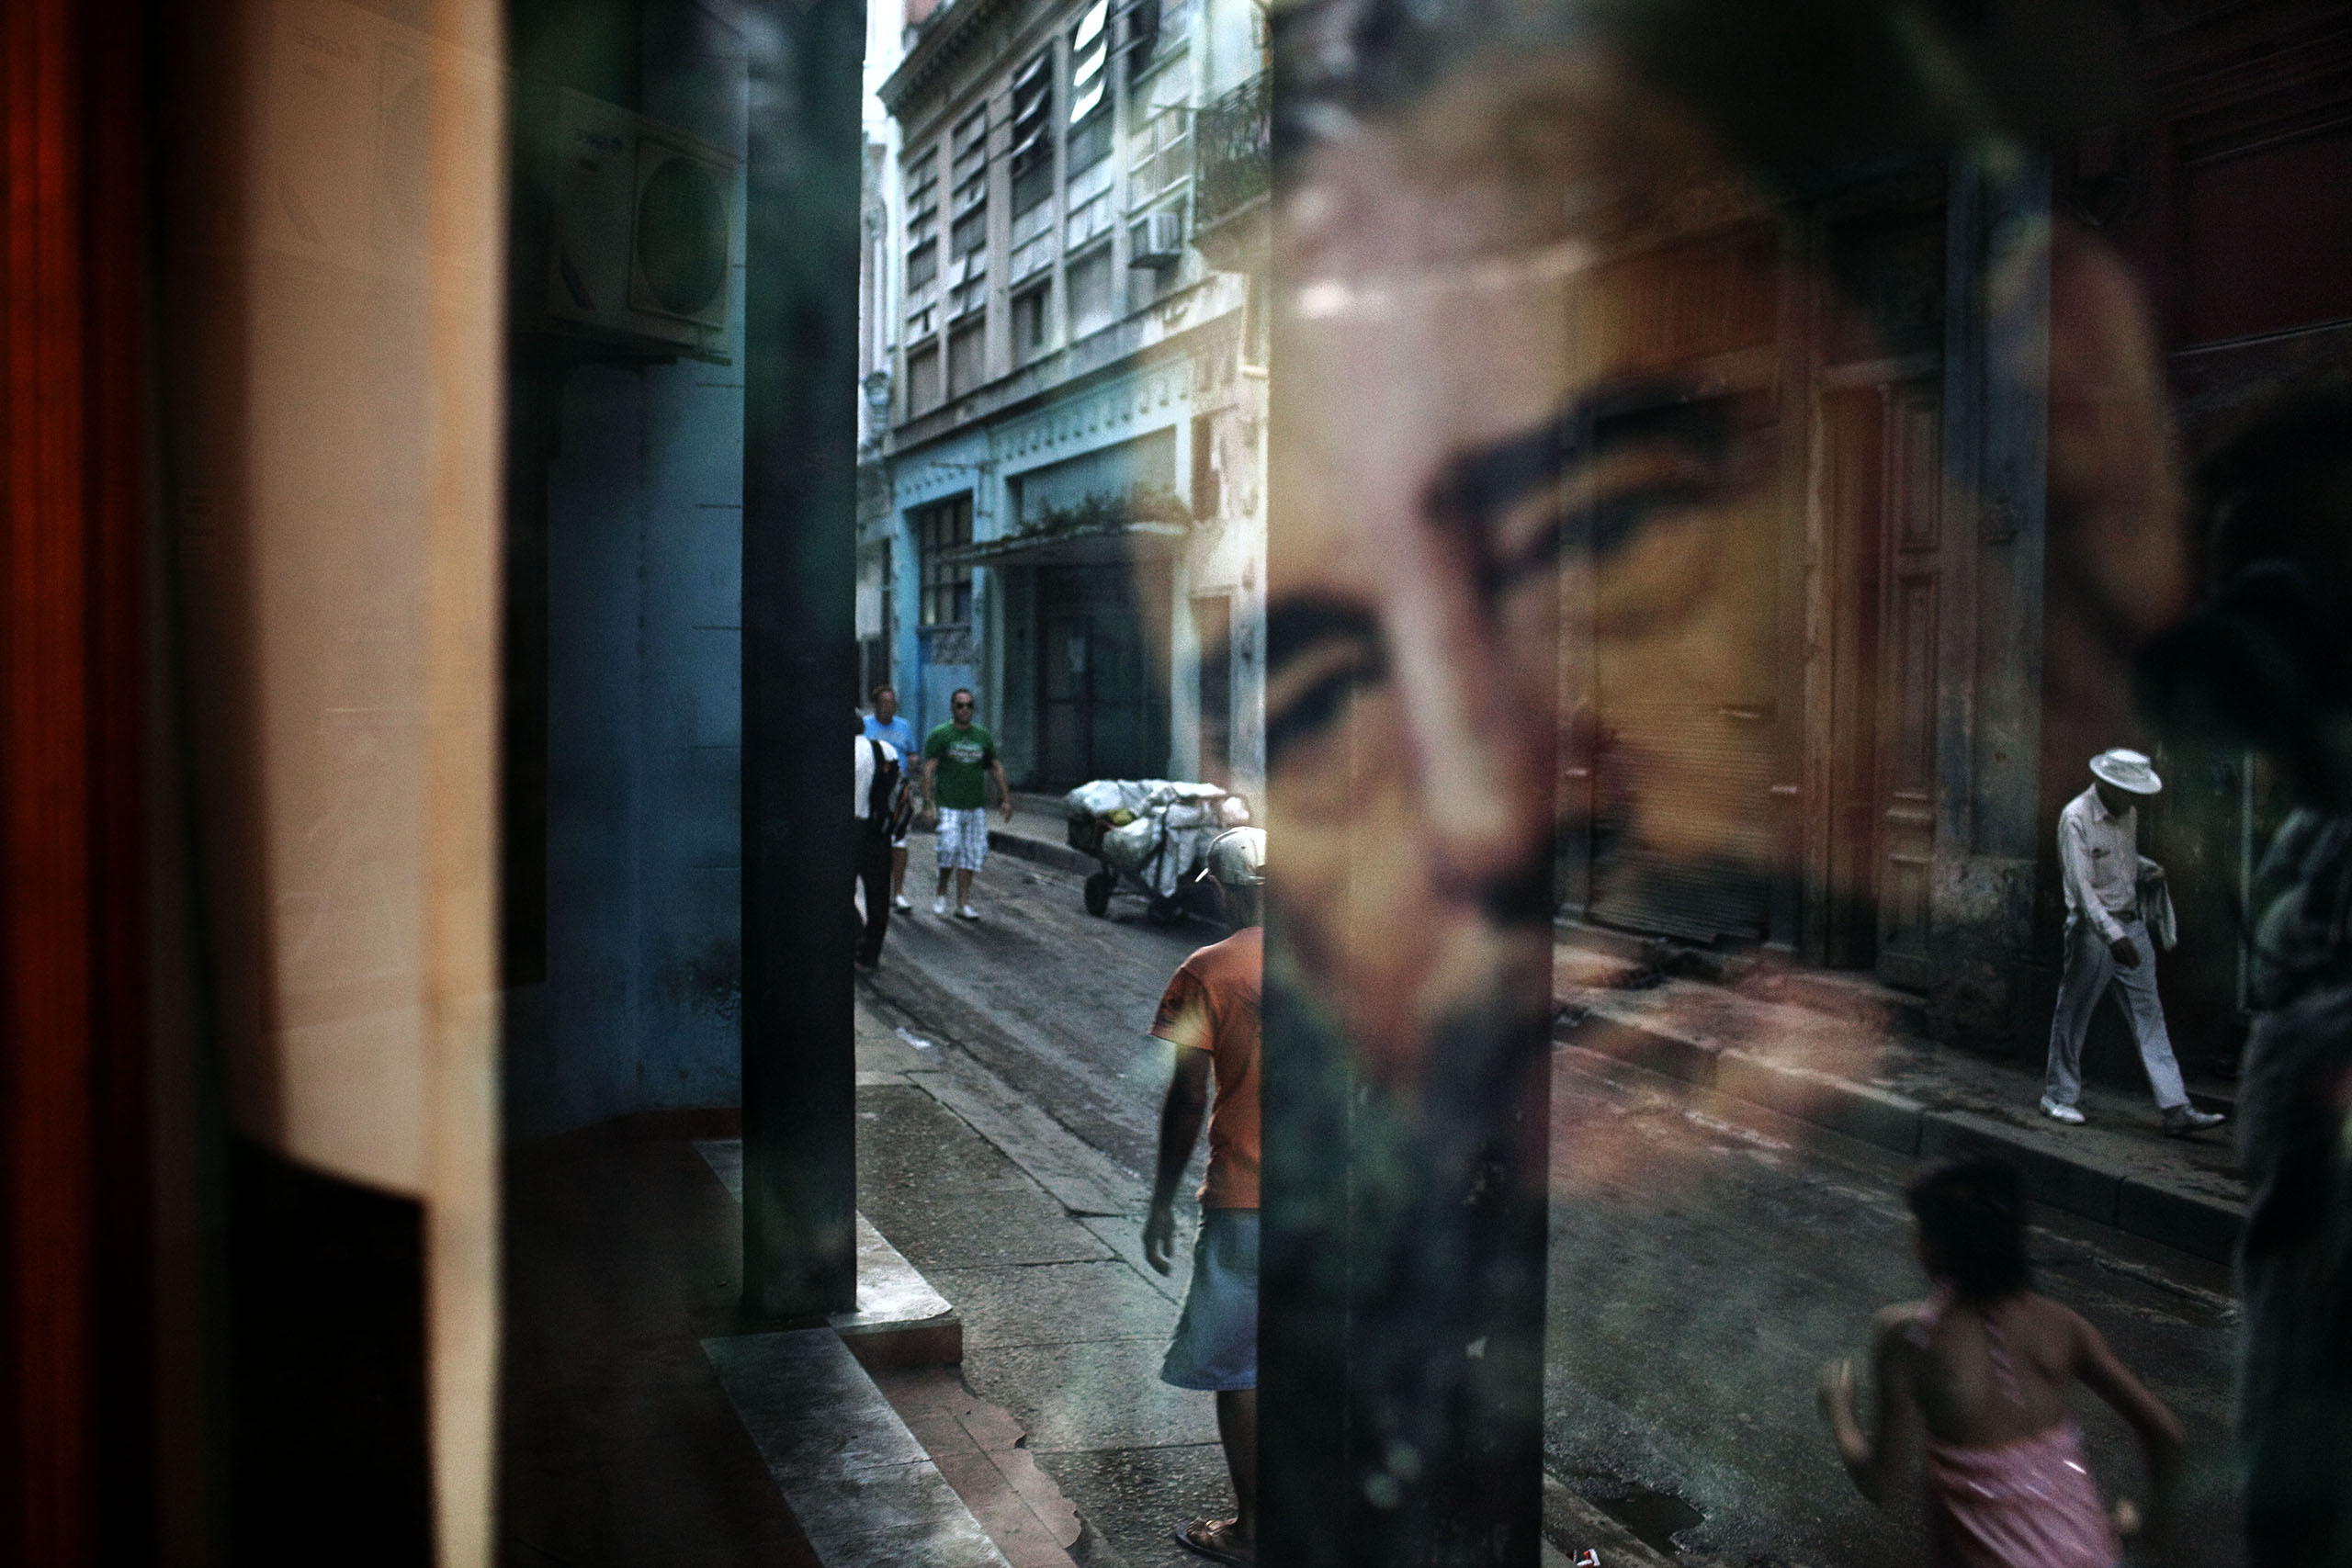 A window reflects an image of Fidel Castro in a working-class Havana neighborhood that attracts few tourists. (Paolo Pellegrin—Magnum)